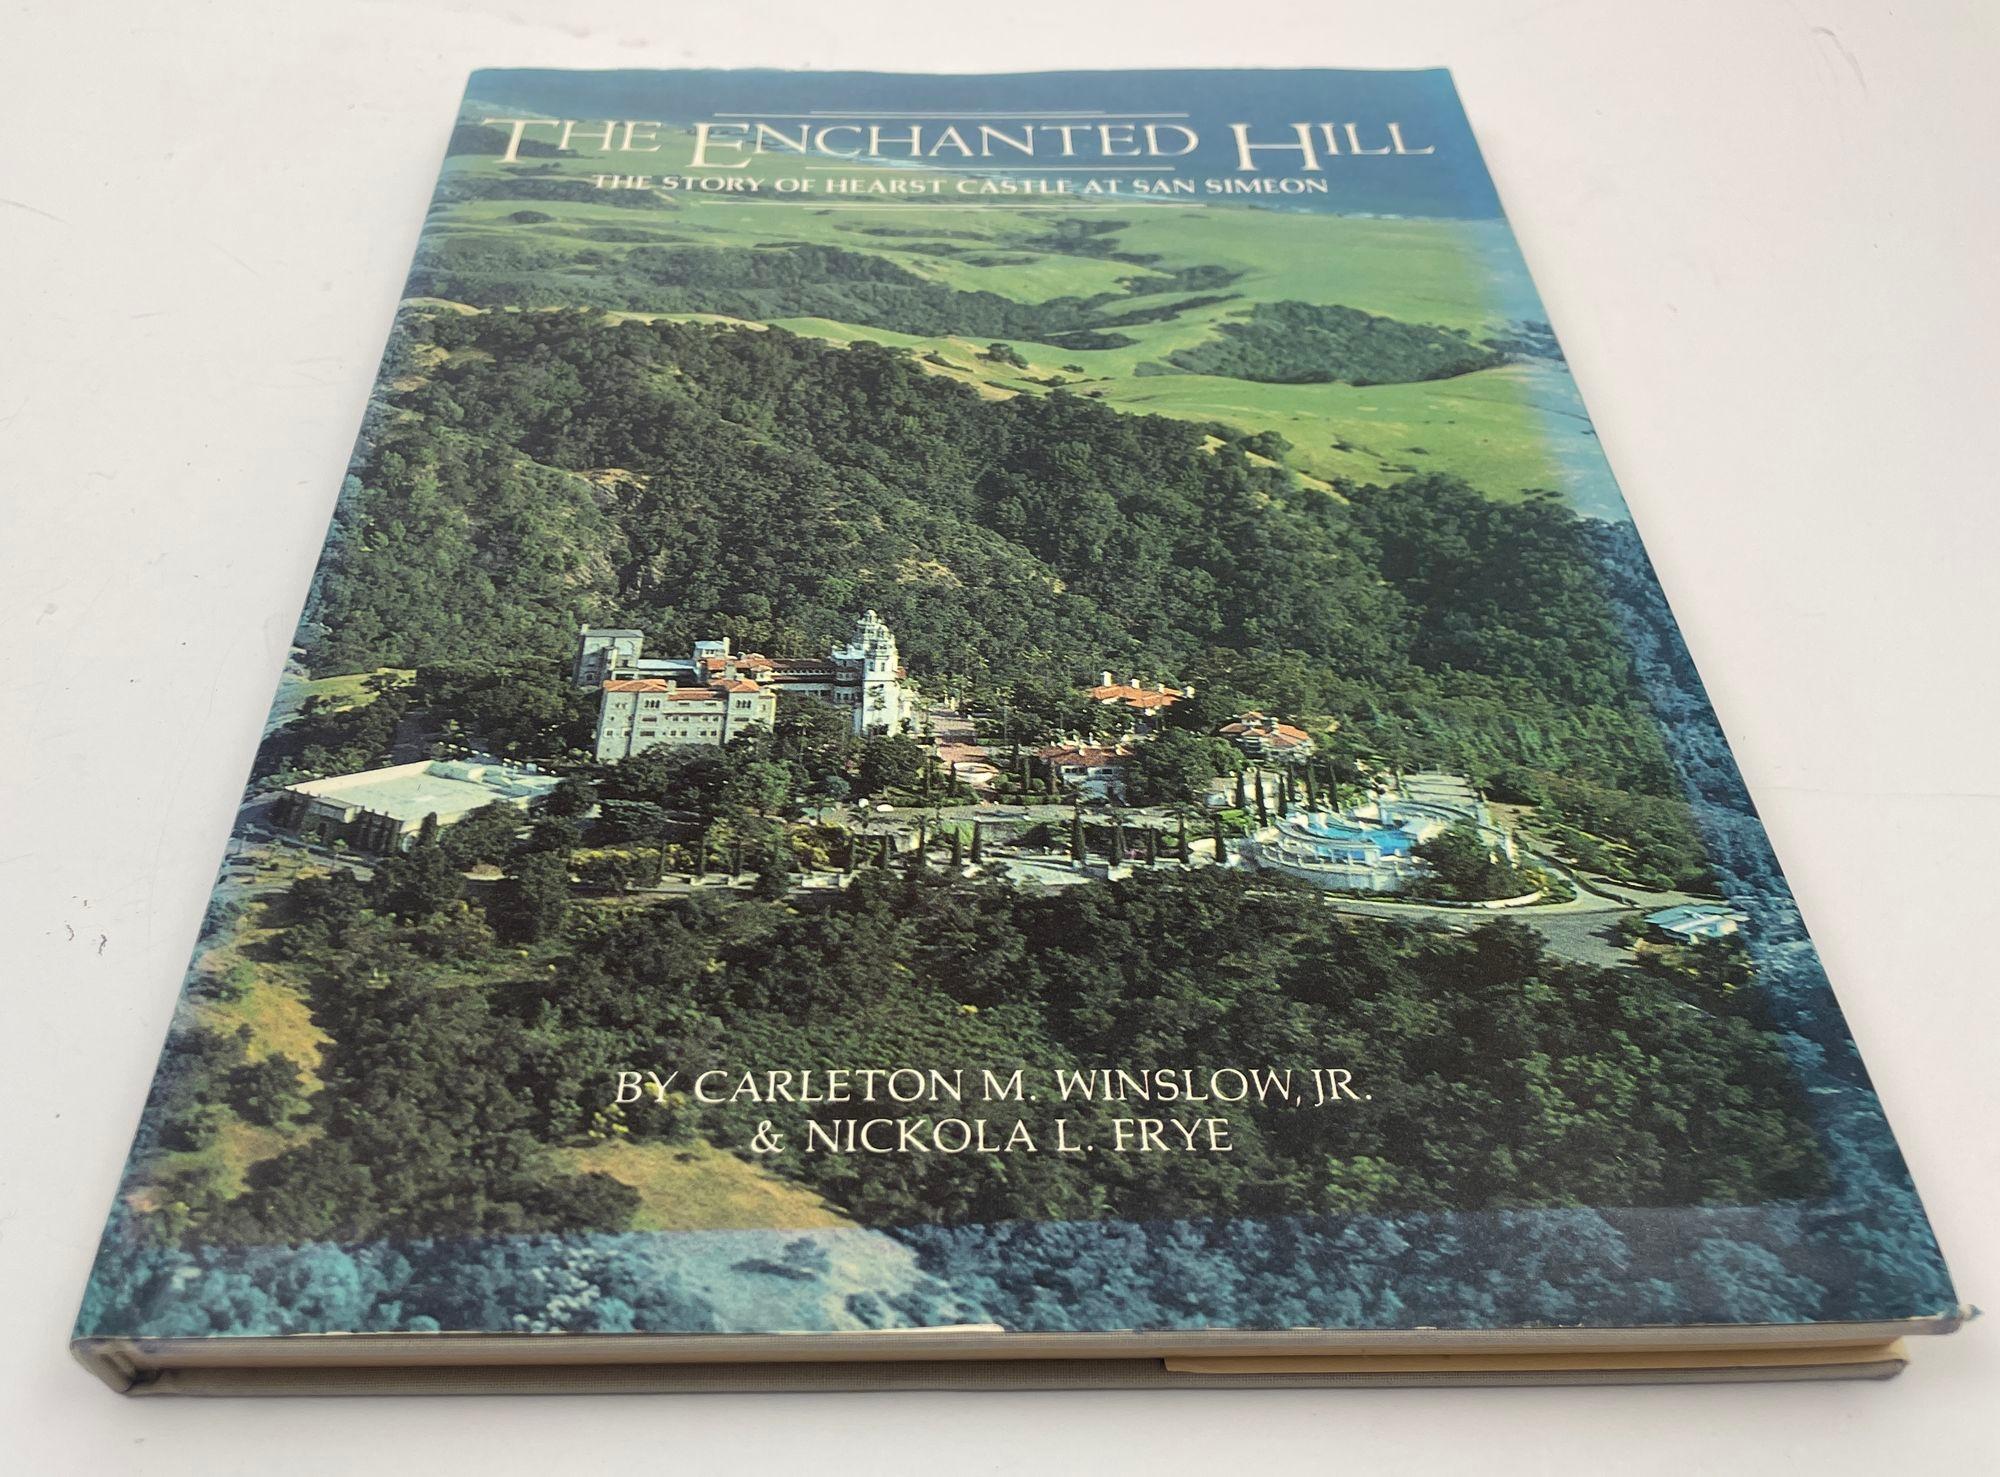 The enchanted hill: The story of Hearst Castle at San Simeon Hardcover Book published in January 1, 1980 by Carleton M Winslow.
Title: The Enchanted Hill. The Story of Hearst.
Publisher: Celestial Arts., Millbrae.
Publication Date: 1980.
Binding: